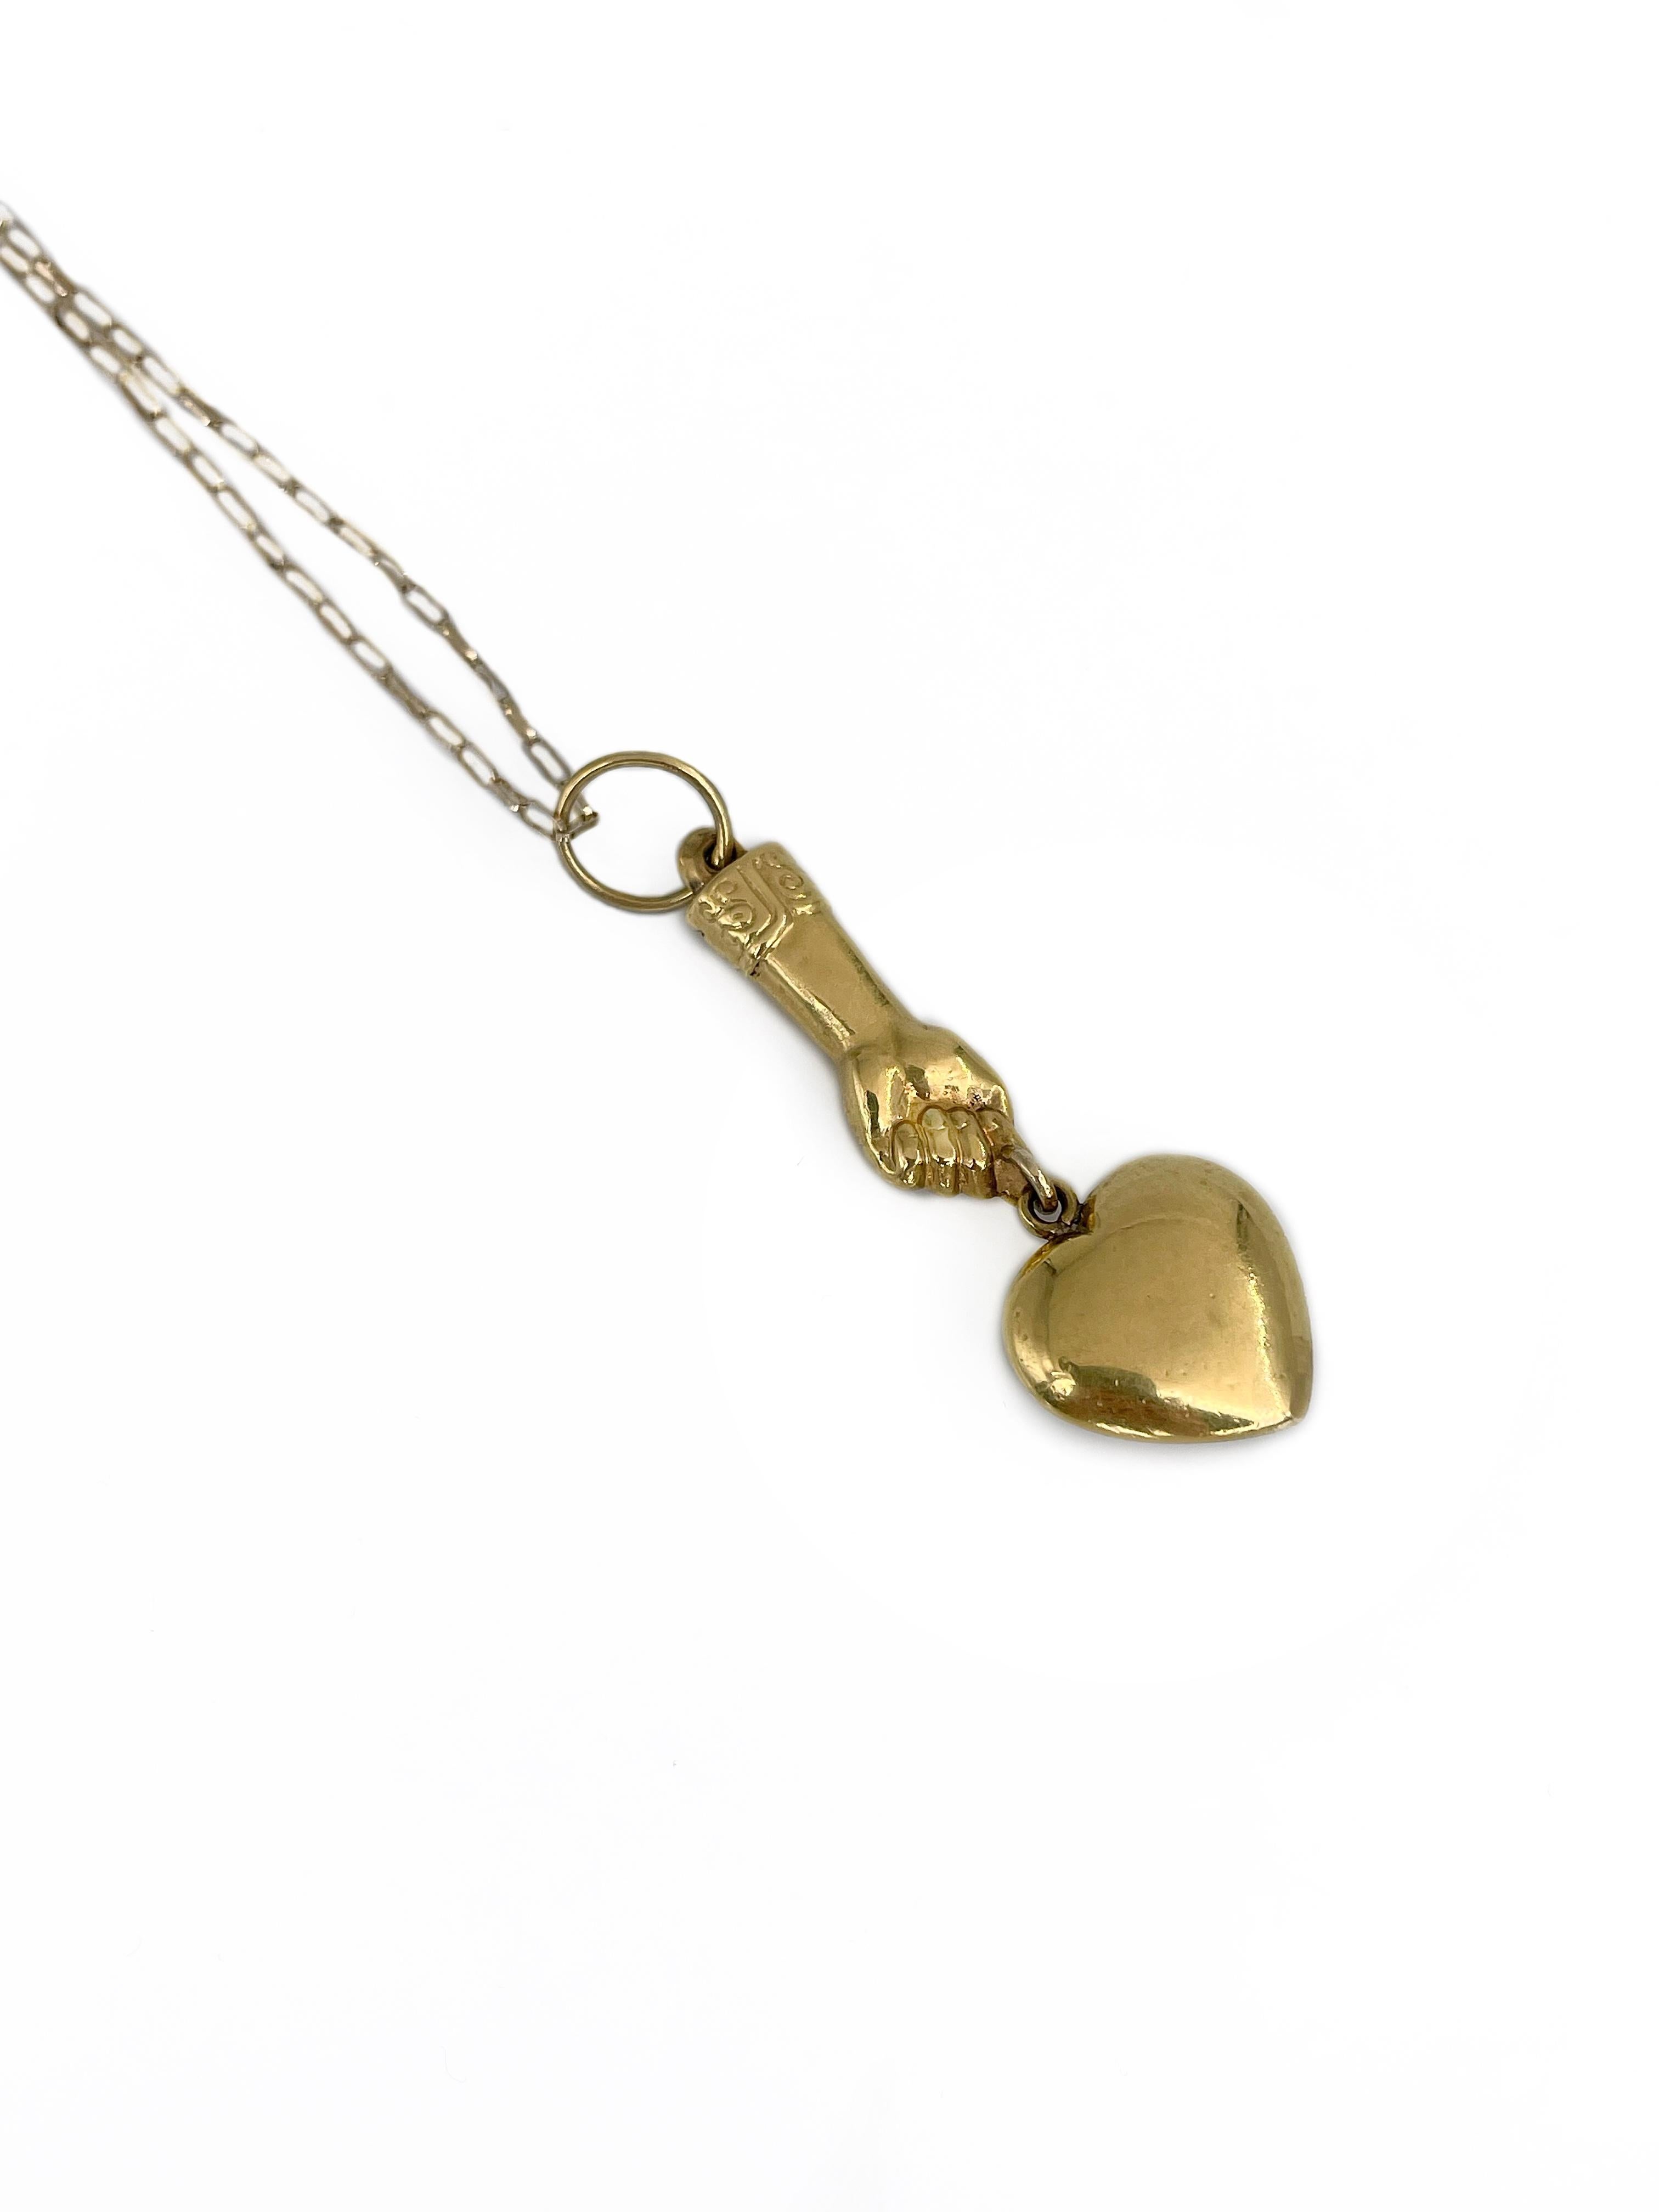 Victorian 14 Karat Gold Mano Figa Holding Heart Agate Pendant Chain Necklace In Good Condition For Sale In Vilnius, LT